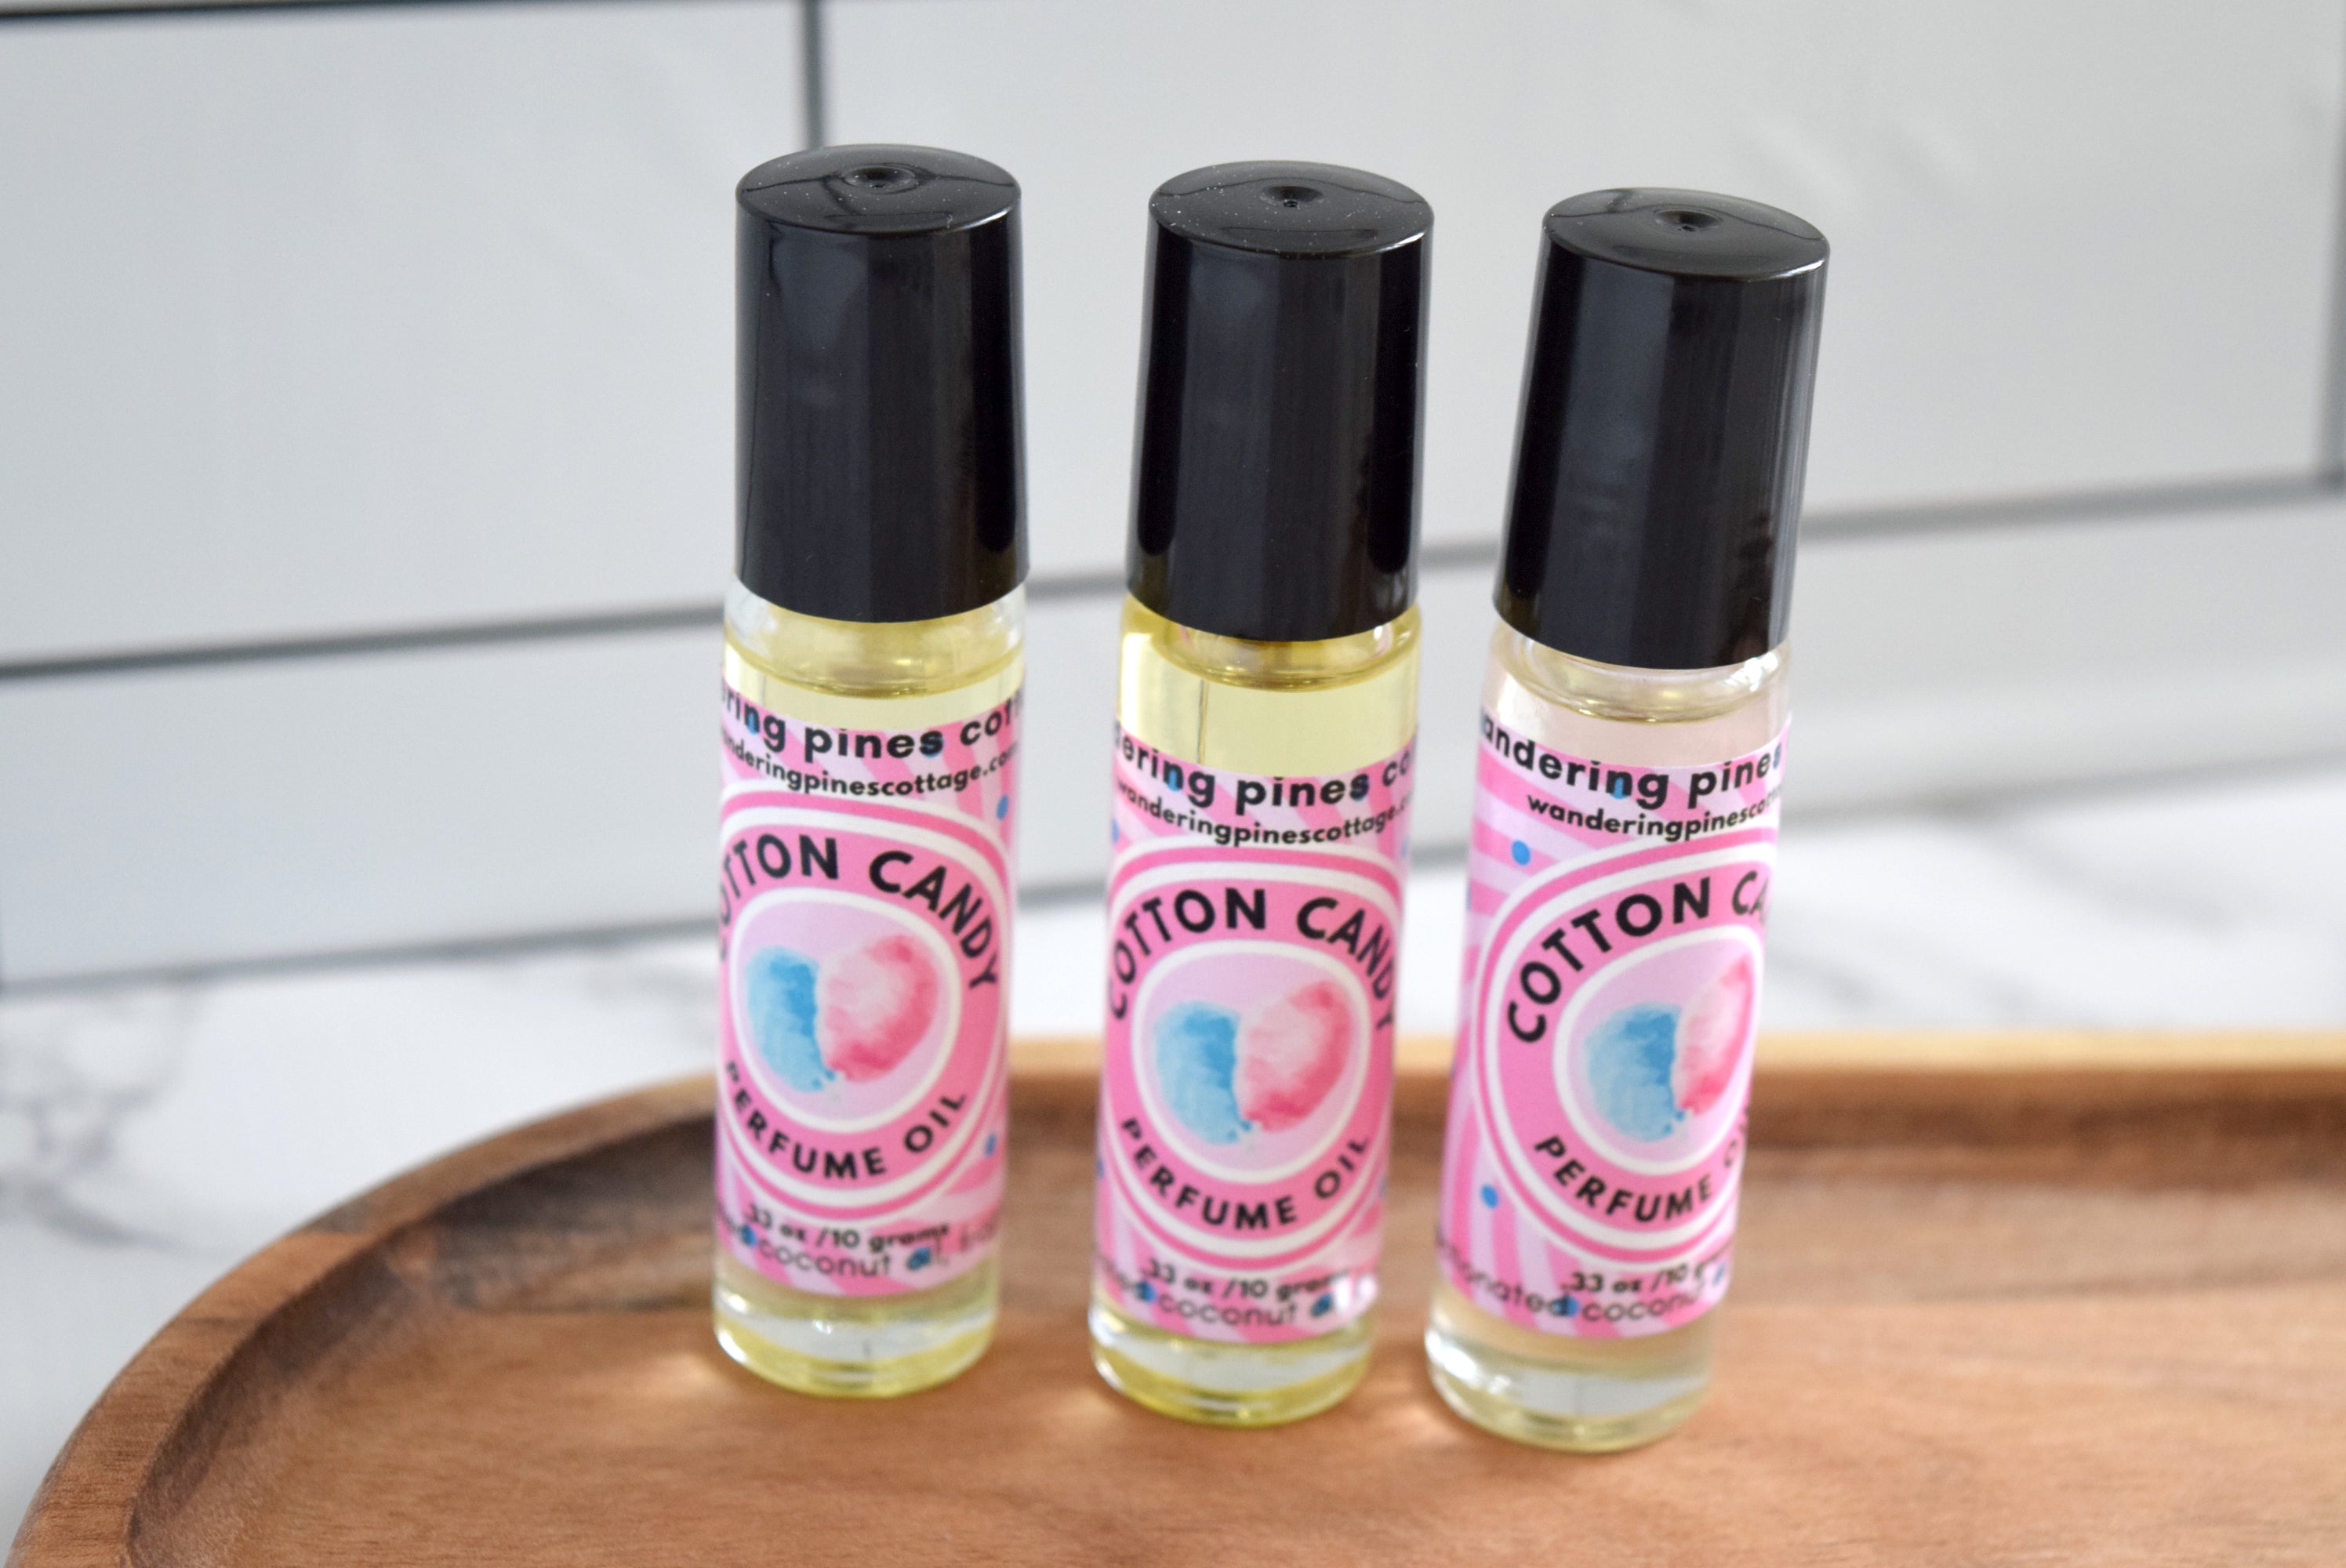 Cotton Candy Twist Fragrance Oil 826